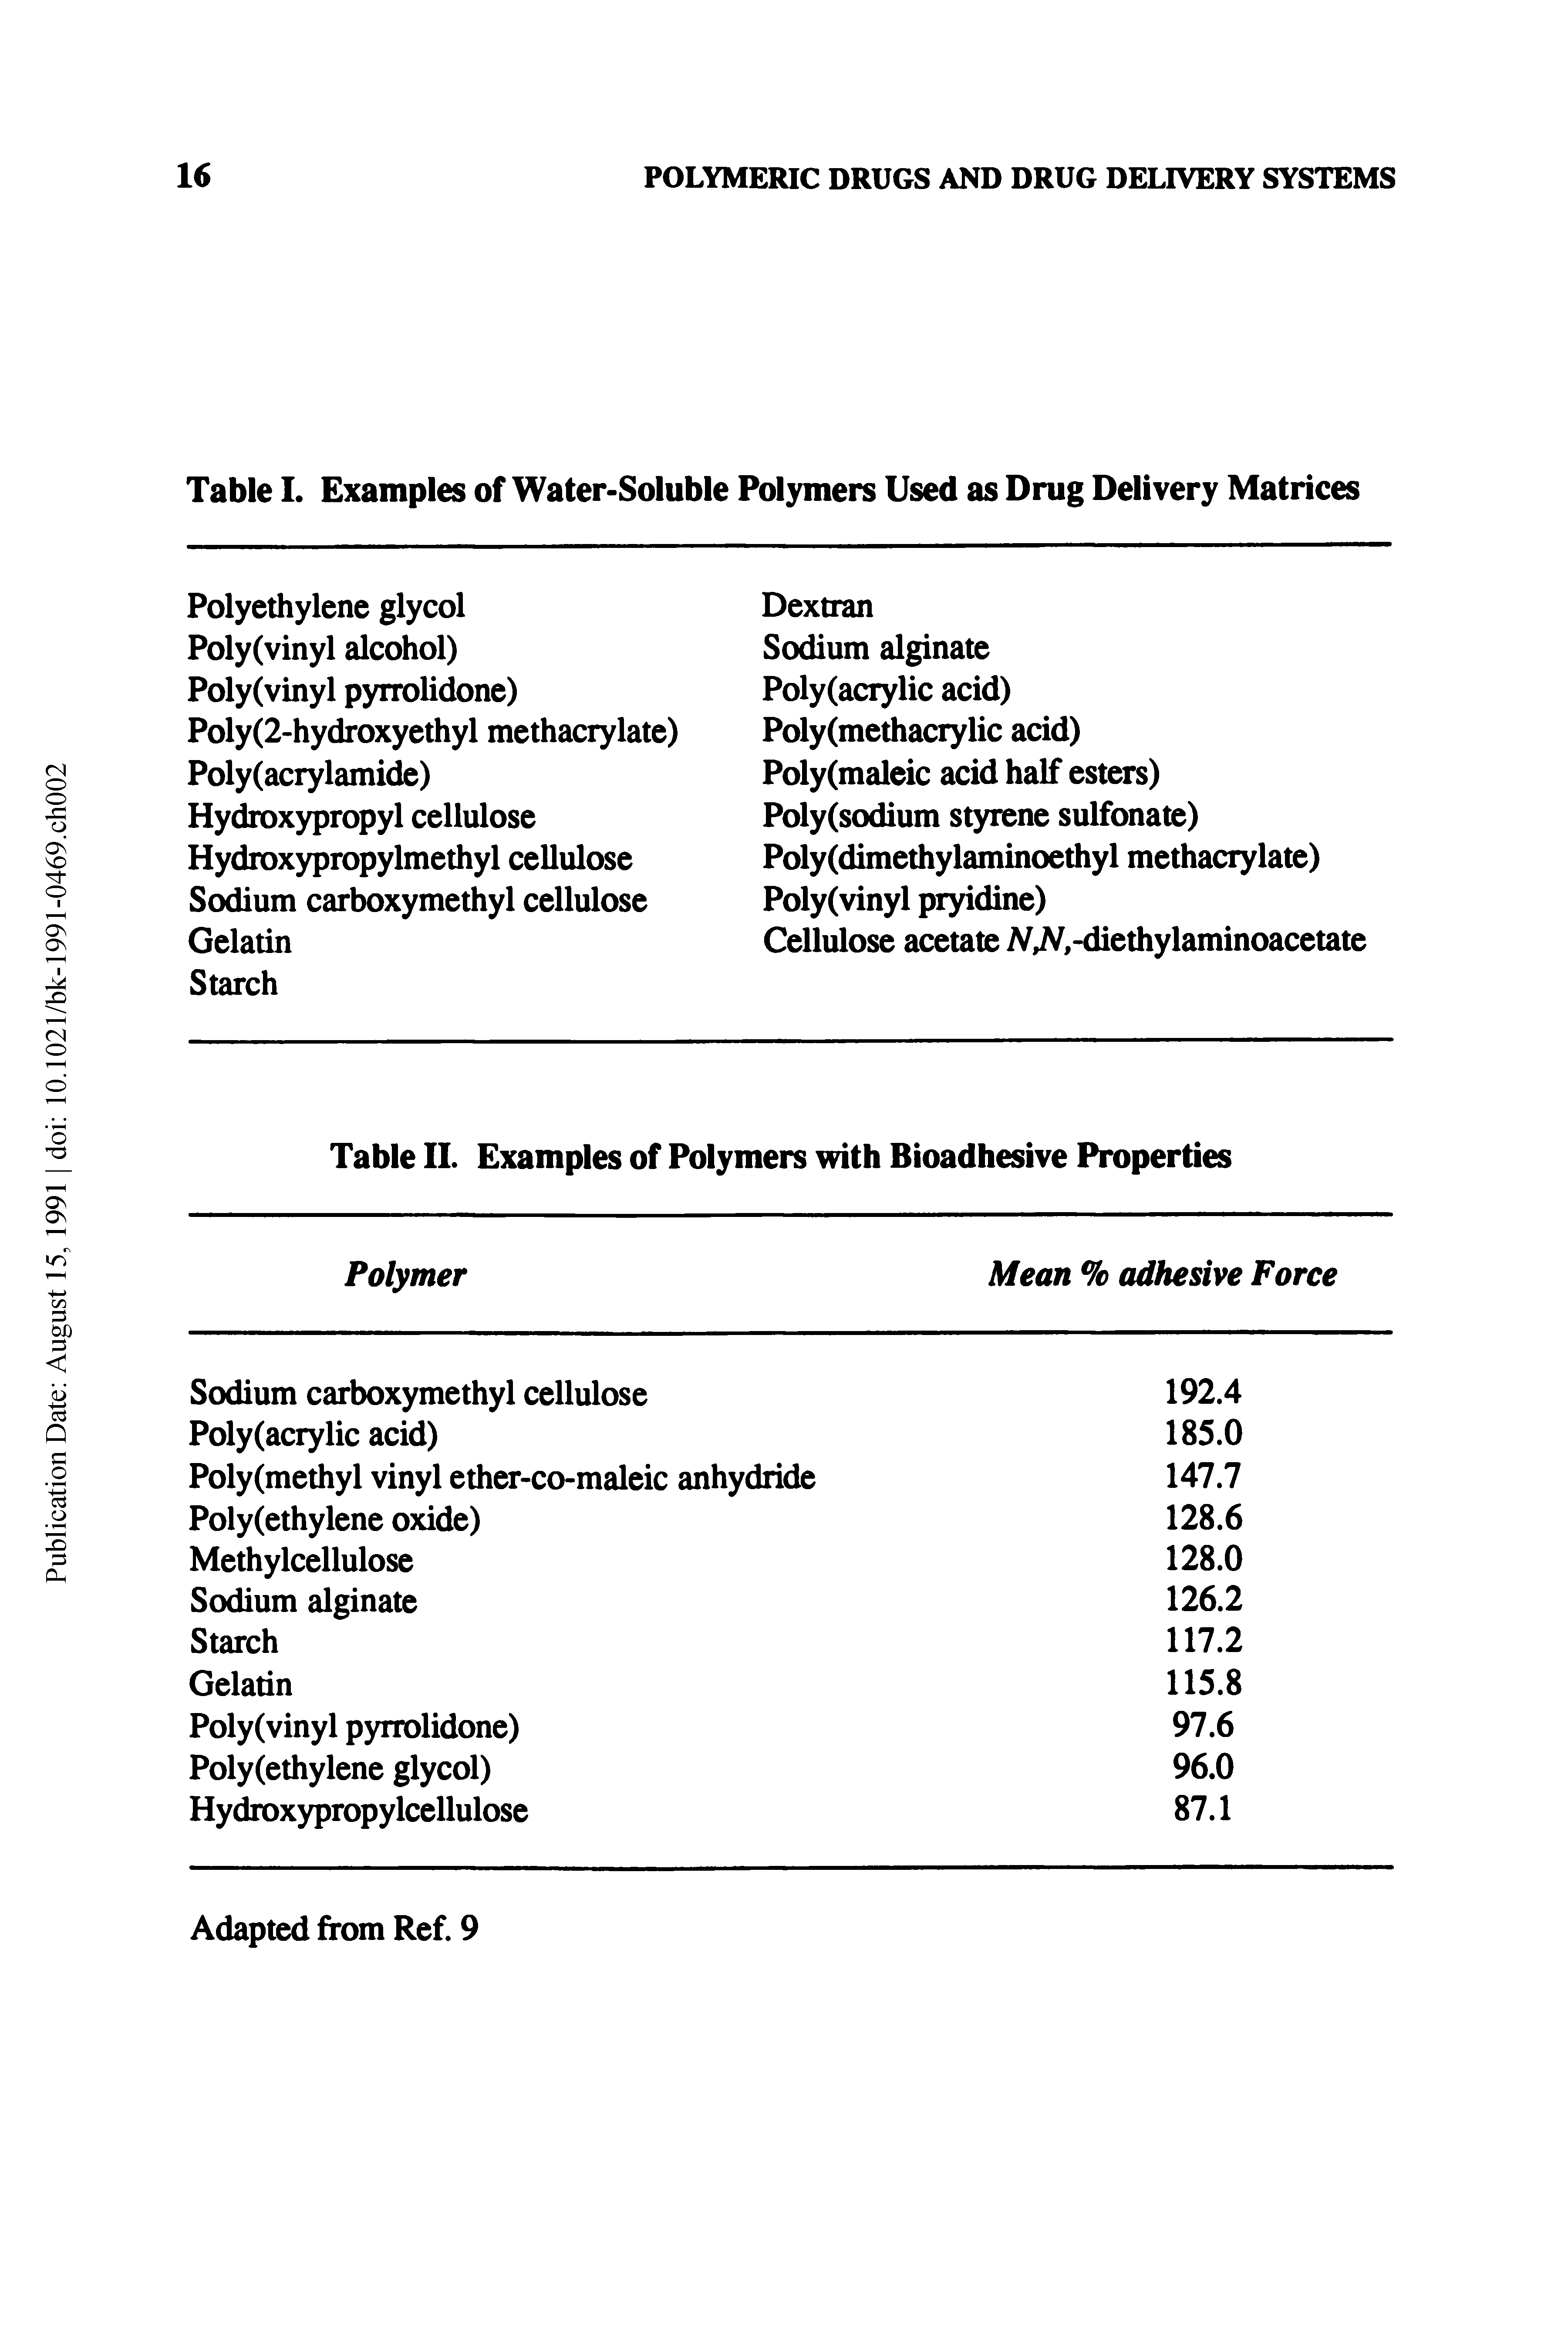 Table I. Examples of Water-Soluble Polymers Used as Drug Delivery Matrices...